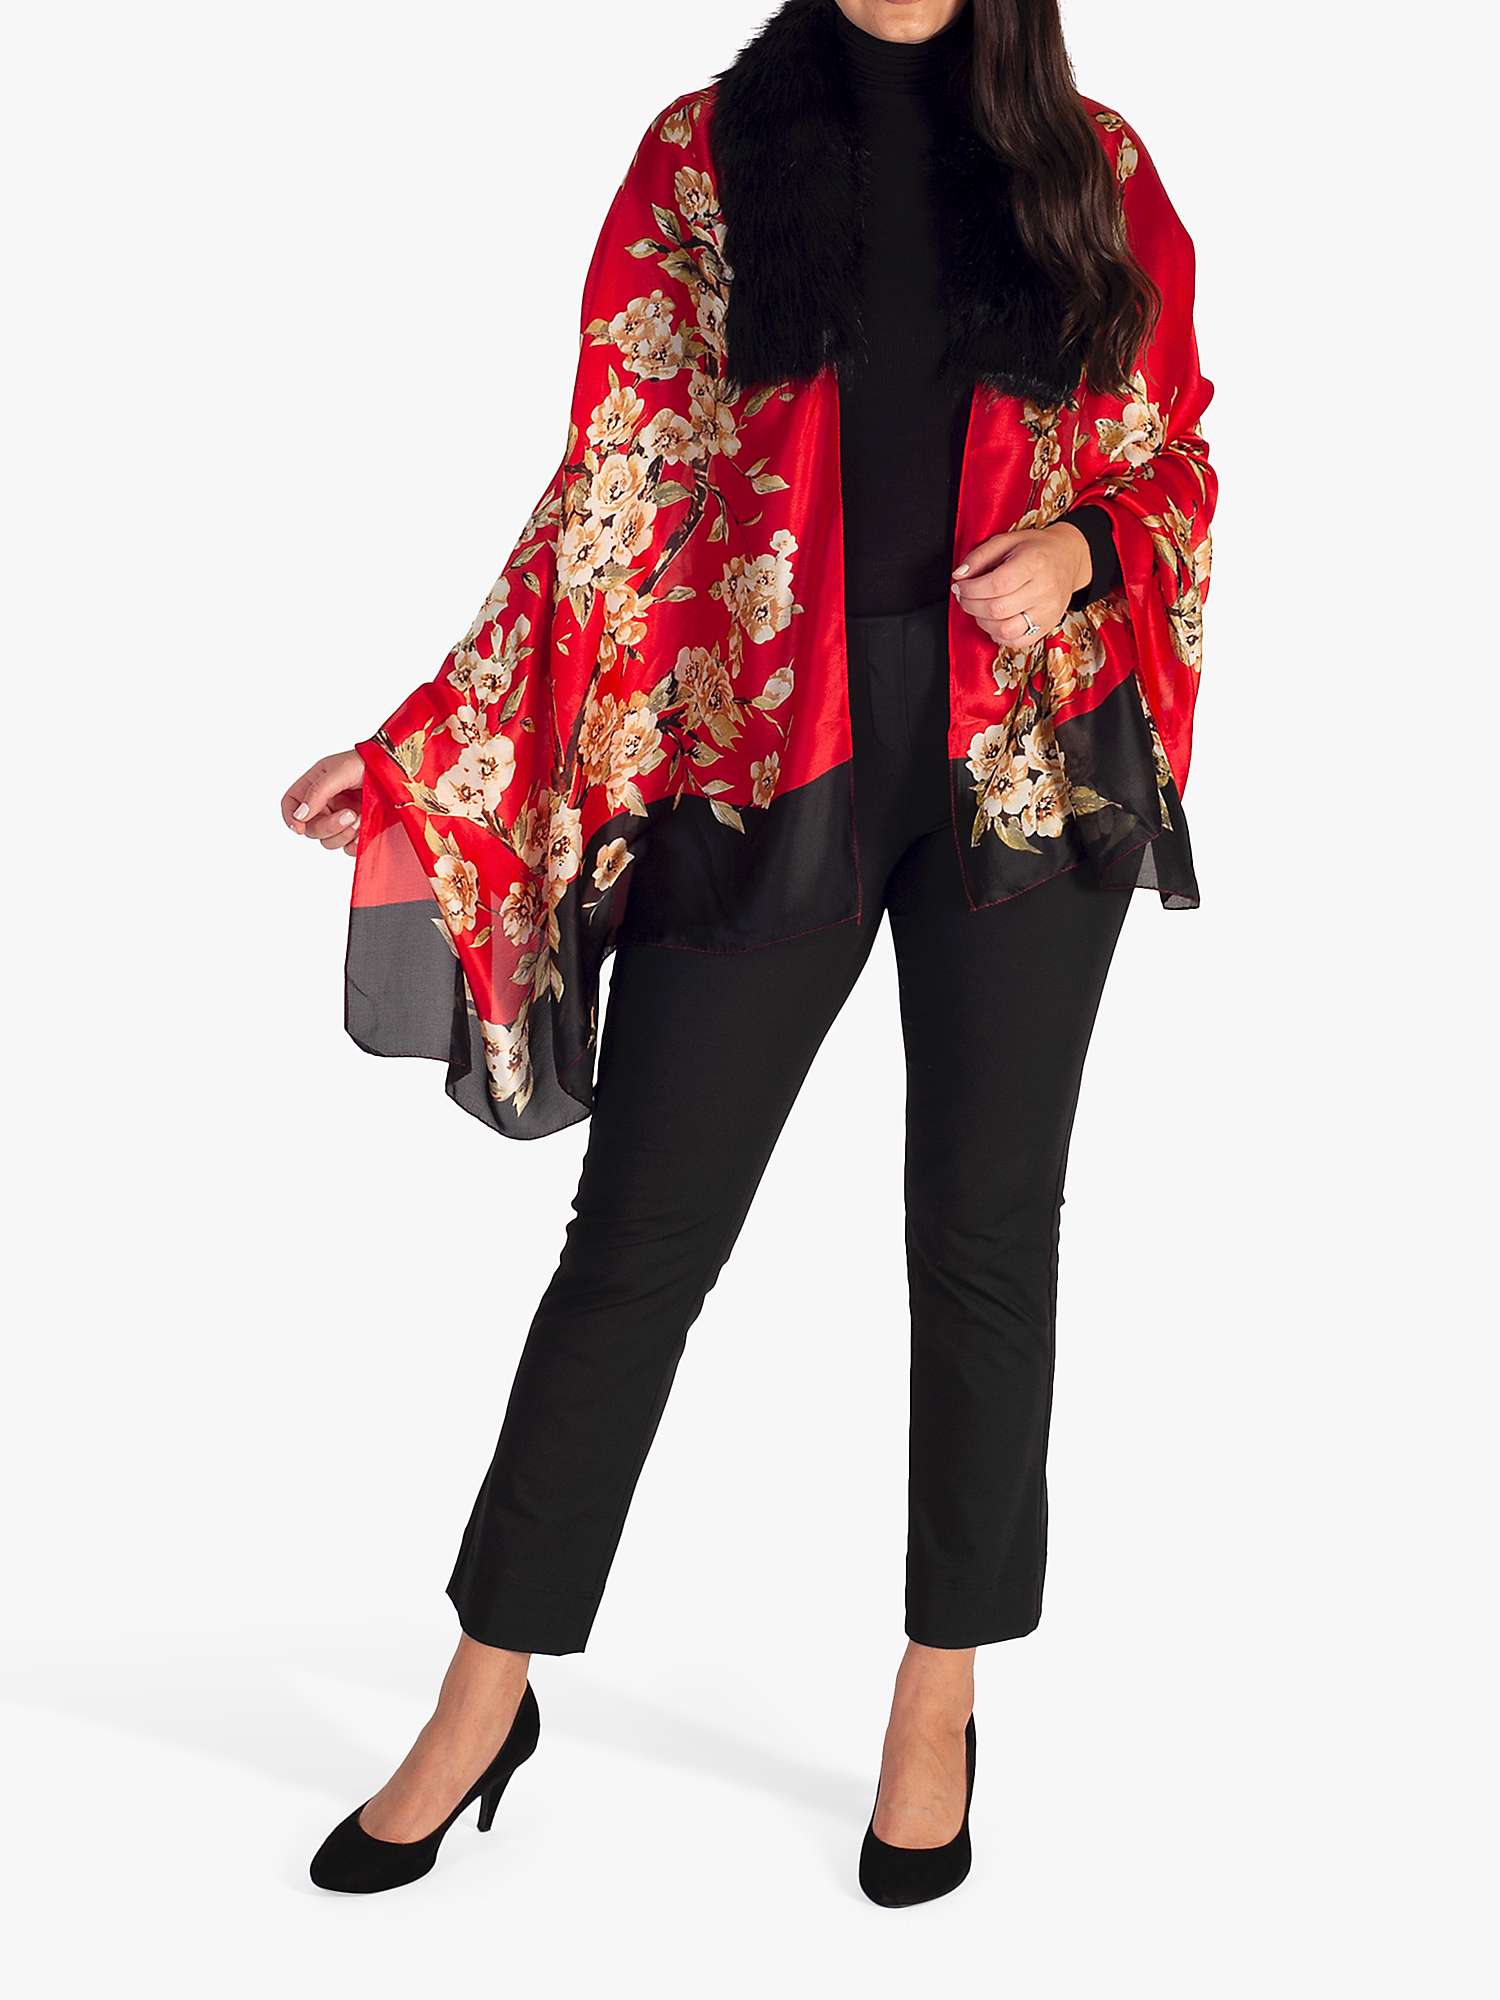 Buy chesca Floral Print Scarf, Red/Multi Online at johnlewis.com